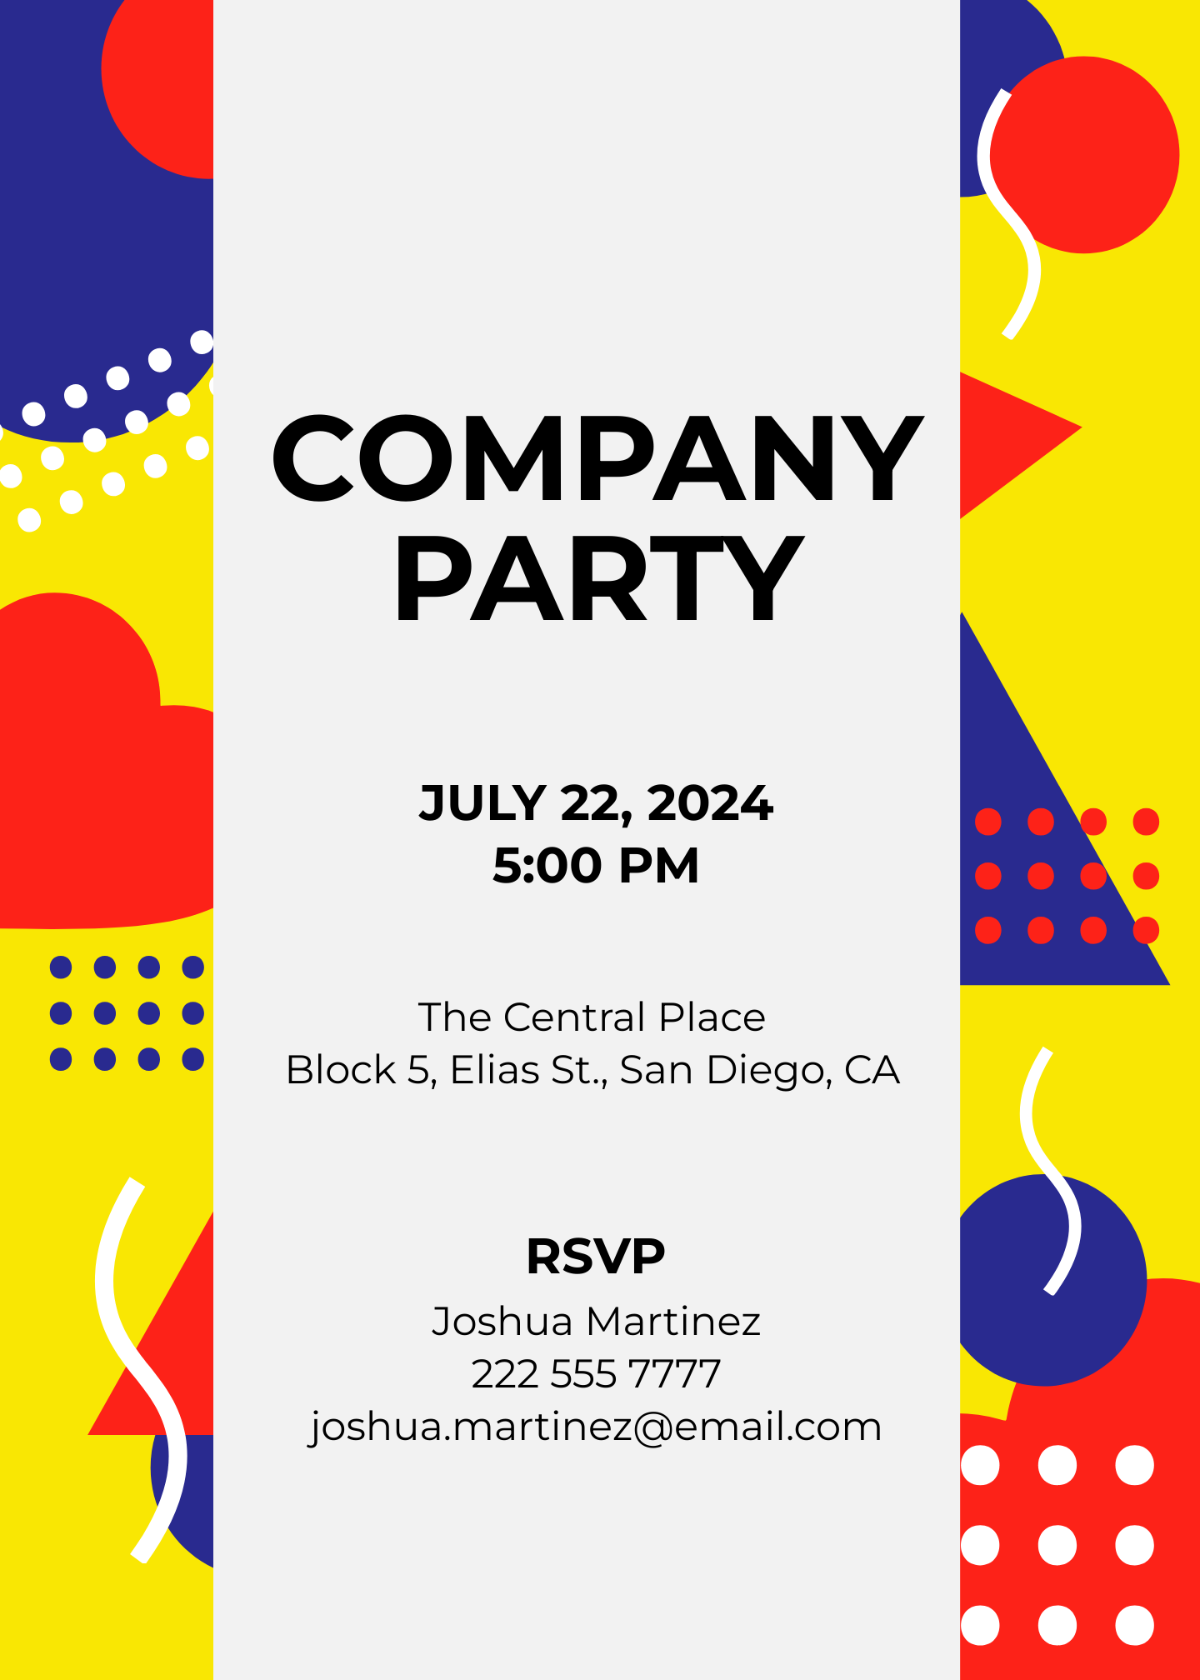 Email Party Invitation